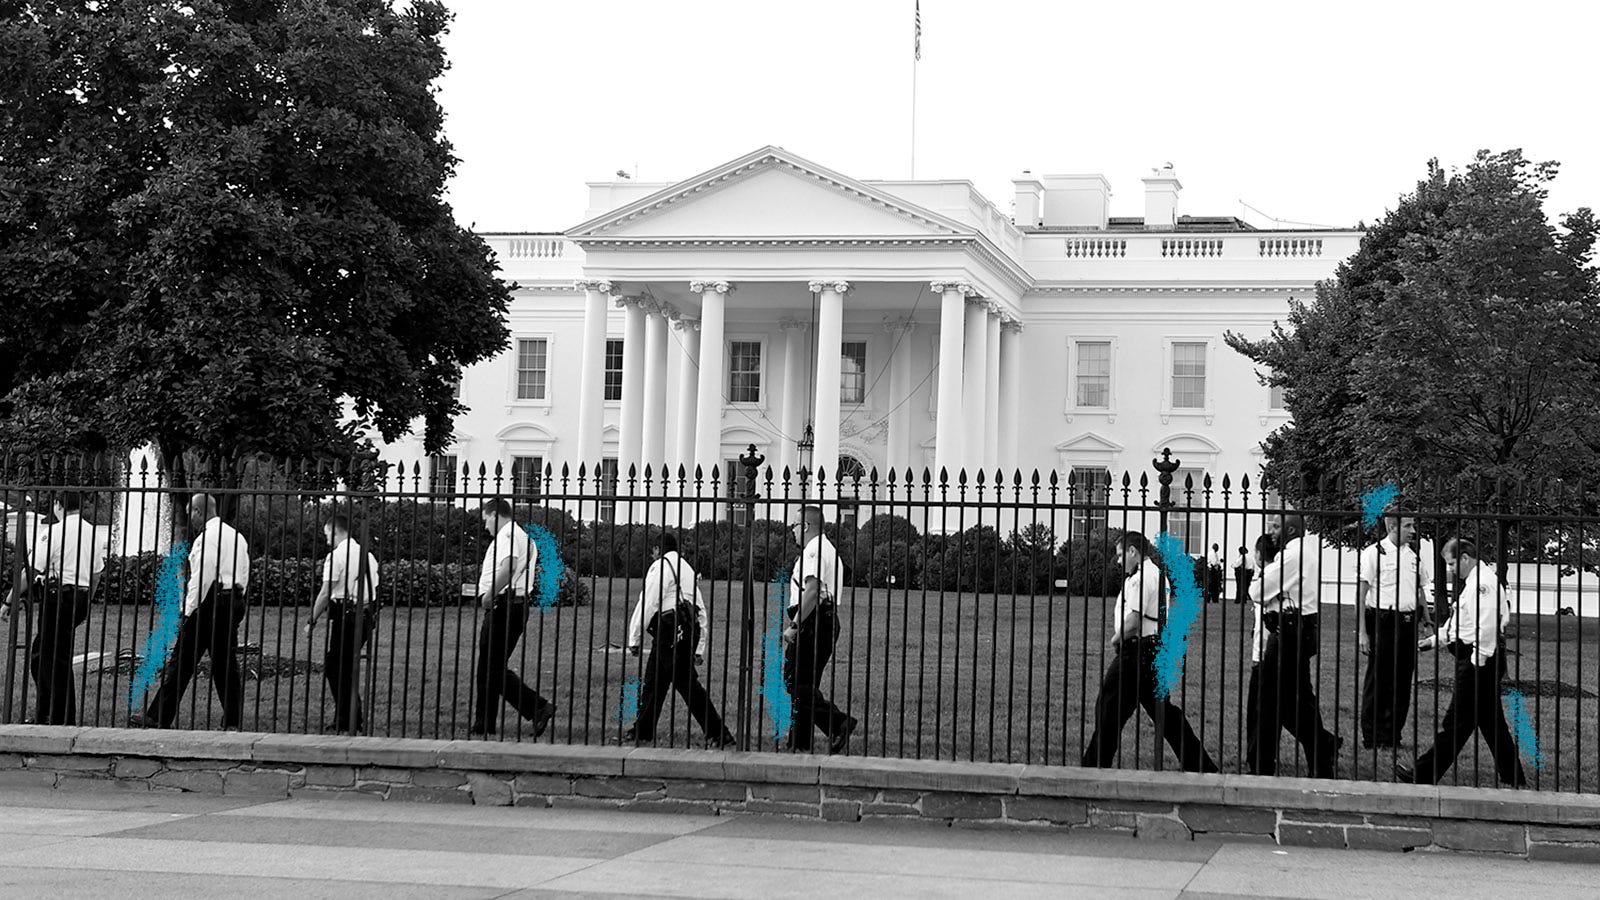 Uniformed Secret Service officers walk along the fence on the North side of the White House in Washington on Sept. 20, 2014. The Secret Service was boosting security outside the White House following an embarrassing security breach in which an intruder with a knife scaled the White House fence, dashed across the lawn and made it all the way inside before agents managed to stop him.